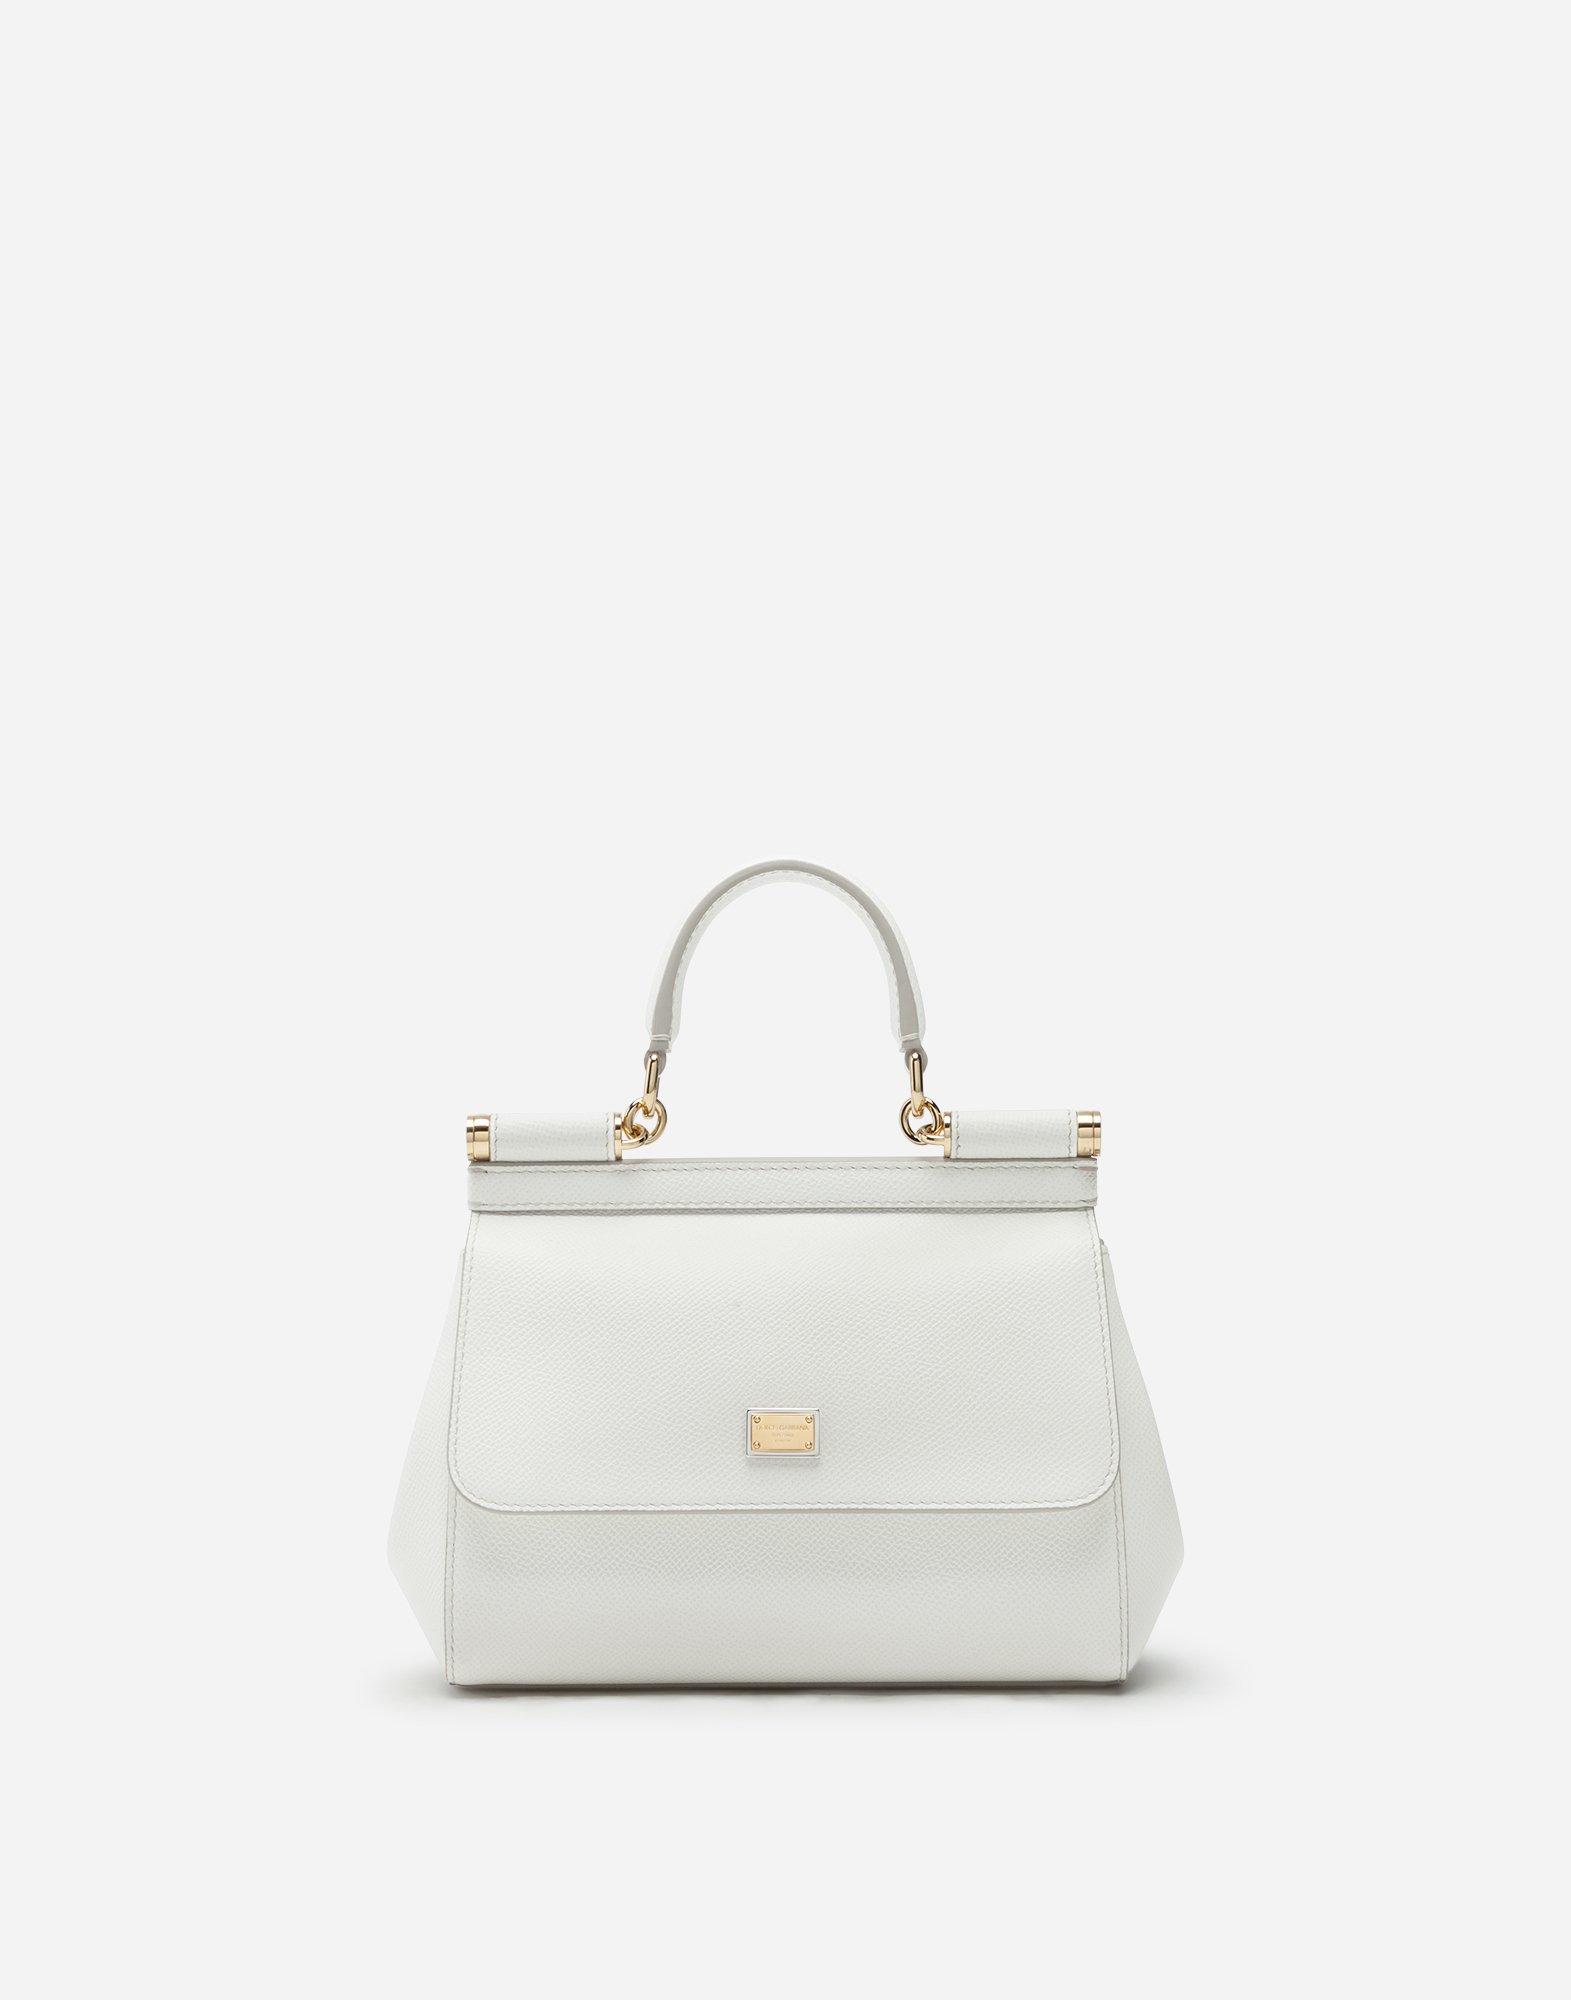 Dolce & Gabbana Small Sicily Bag In Dauphine Leather in White